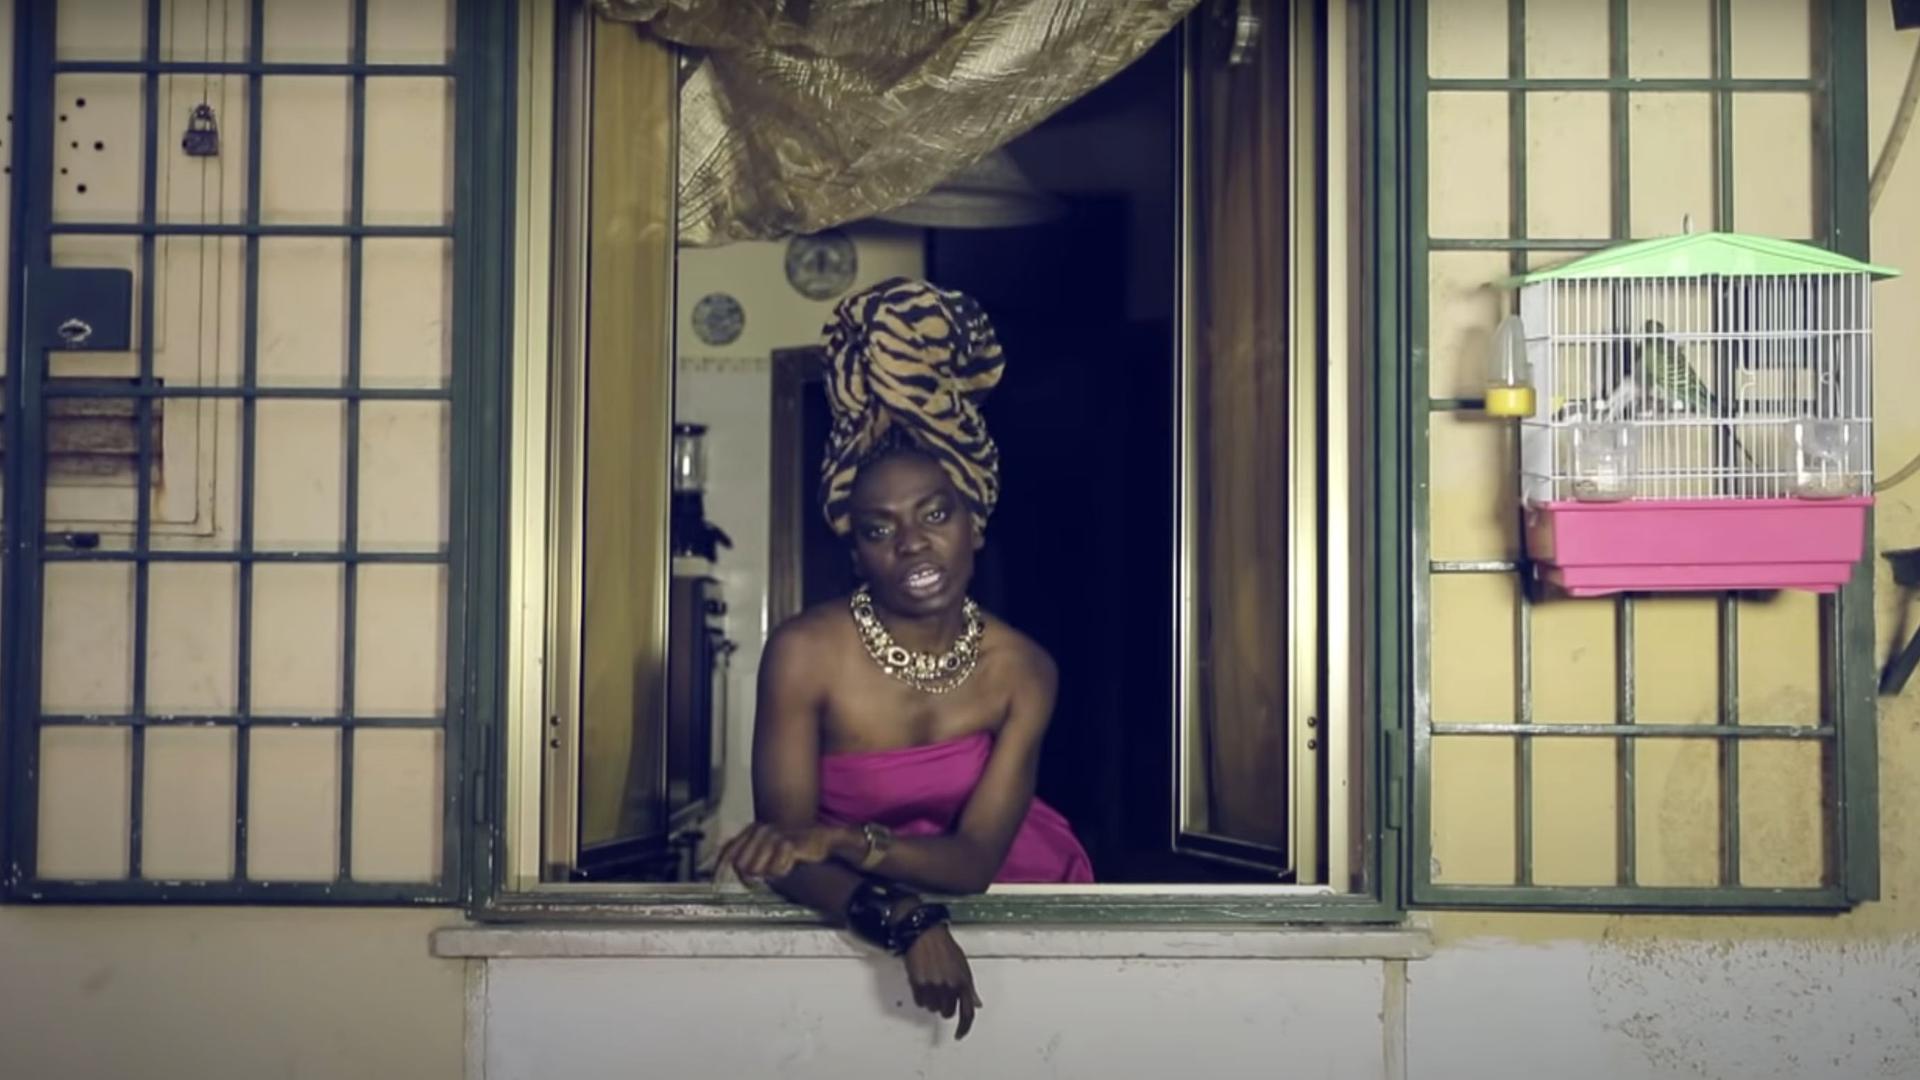 A screenshot from Liberian Italian artist Karima 2G's 2014 music video, "Bunga Bunga," in which she raps about racism and objectification of women.